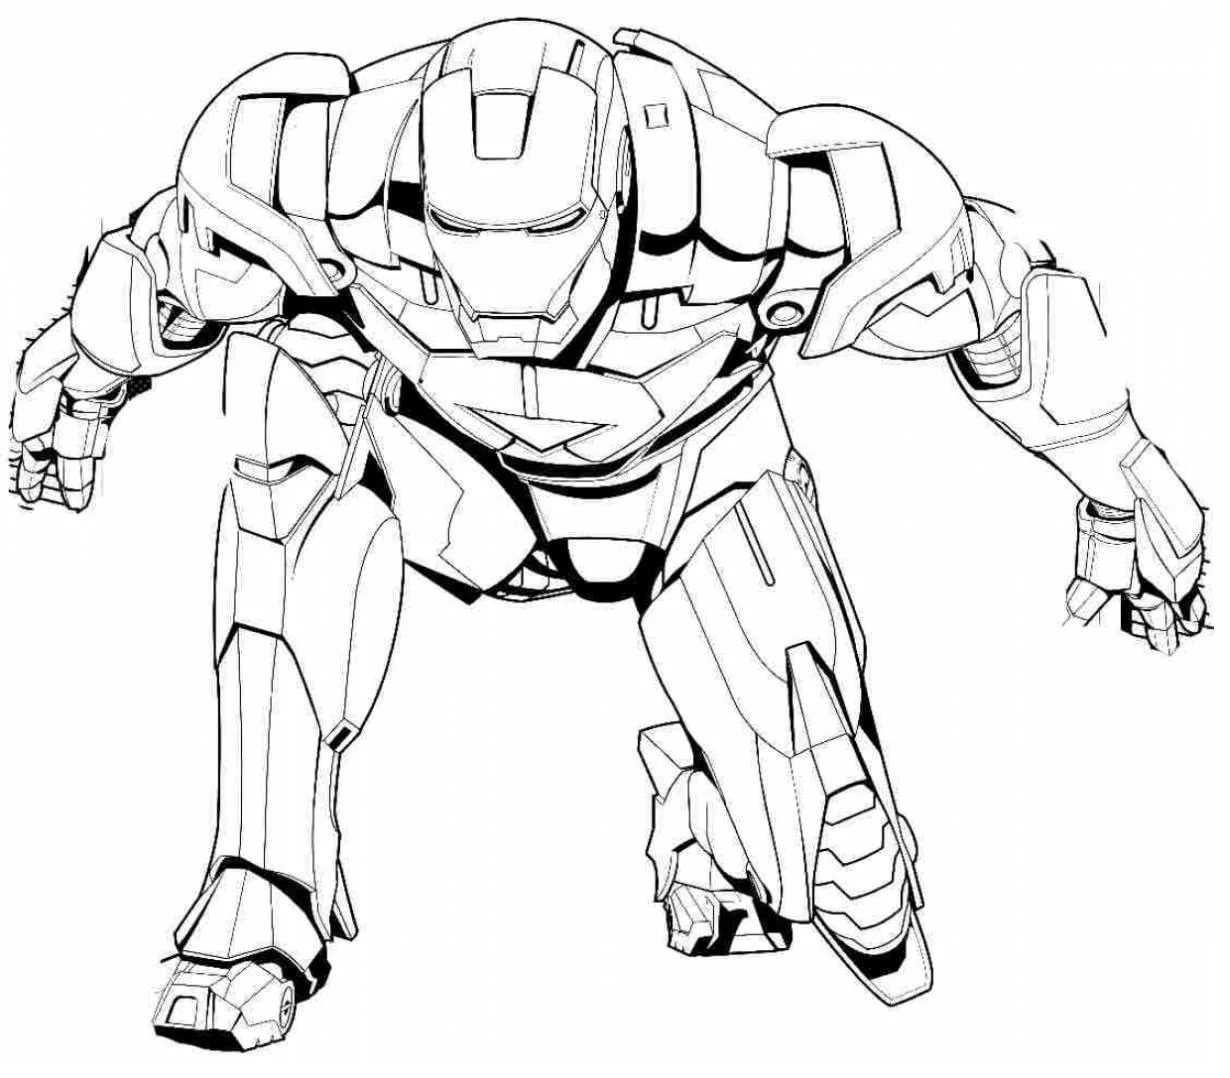 Coloring Pages of Iron Man - SheetalColor.com